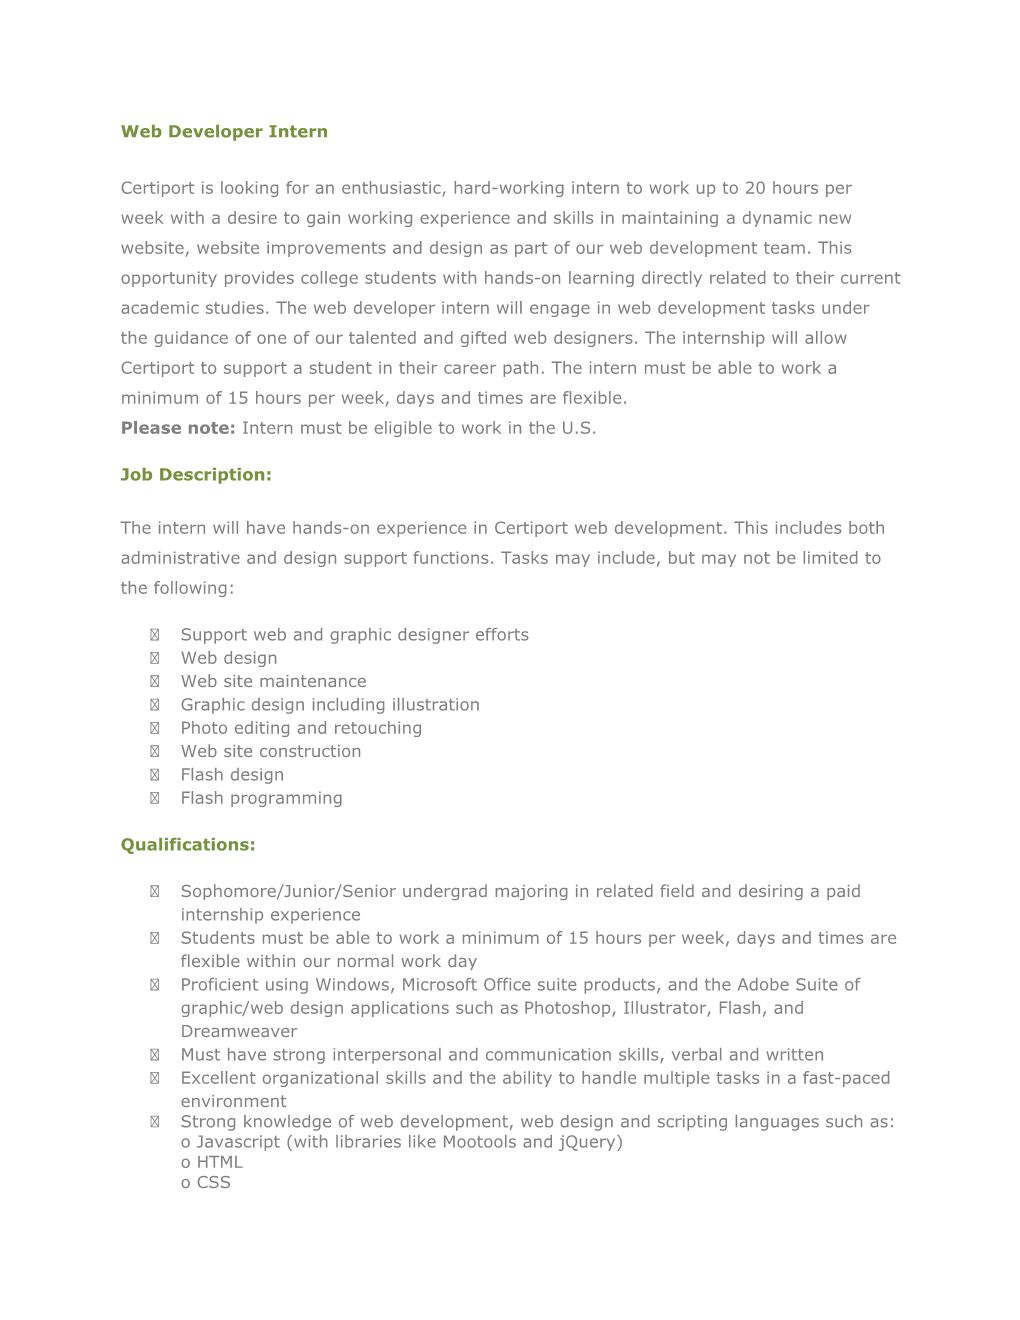 Web Developer Intern Certiport Is Looking for an Enthusiastic, Hard